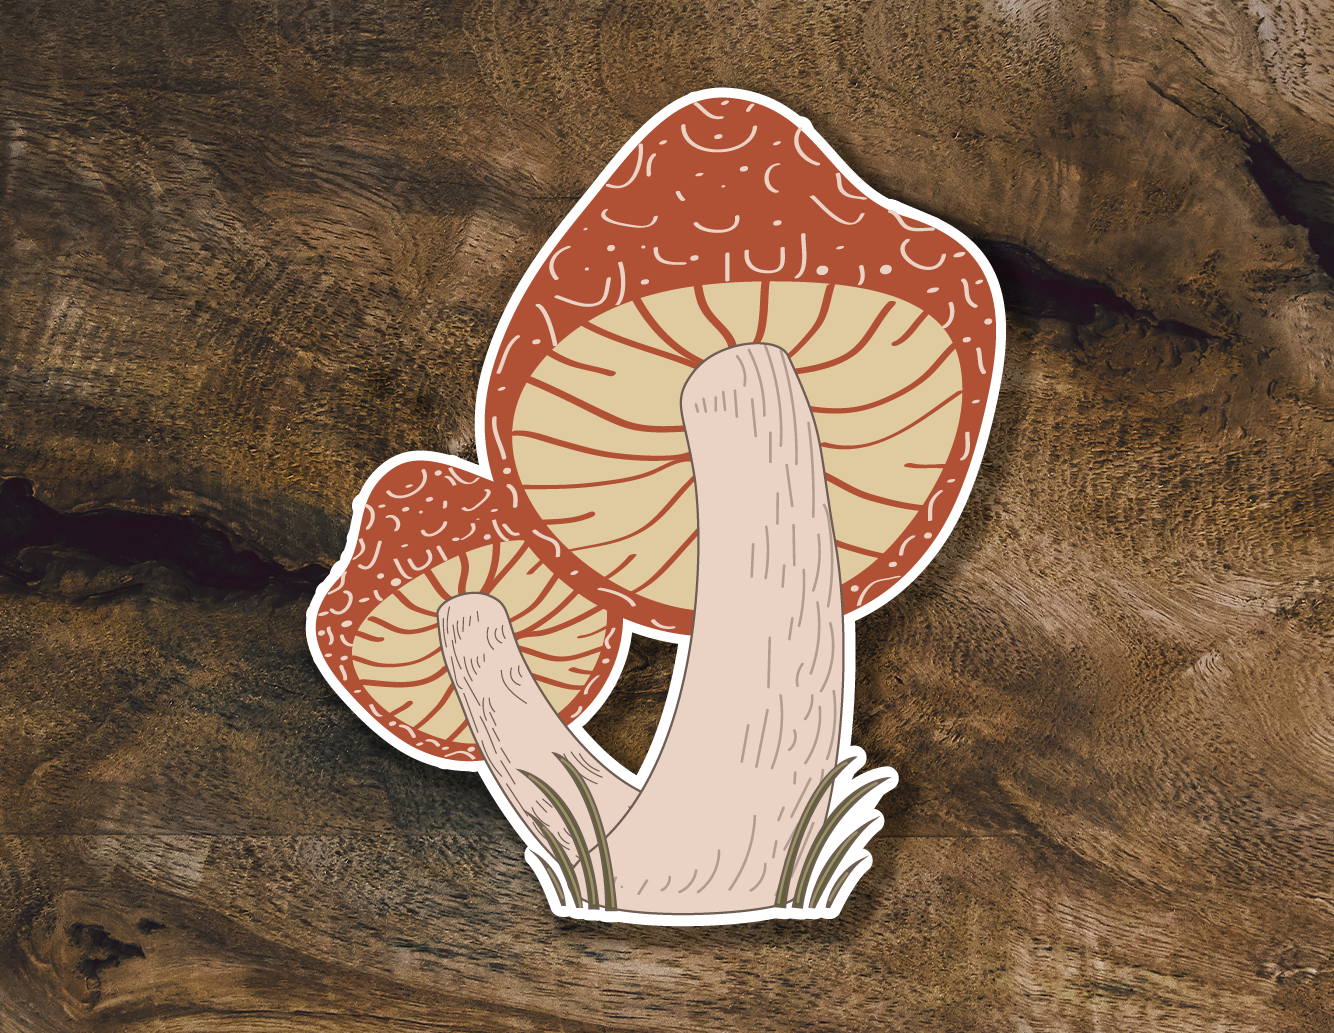 Shroom Sticker| Psychedelic Mushroom Sticker for Water Bottle |Mushroom  Sticker| Mycologist Sticker for Water Bottles |  Fungi Decal